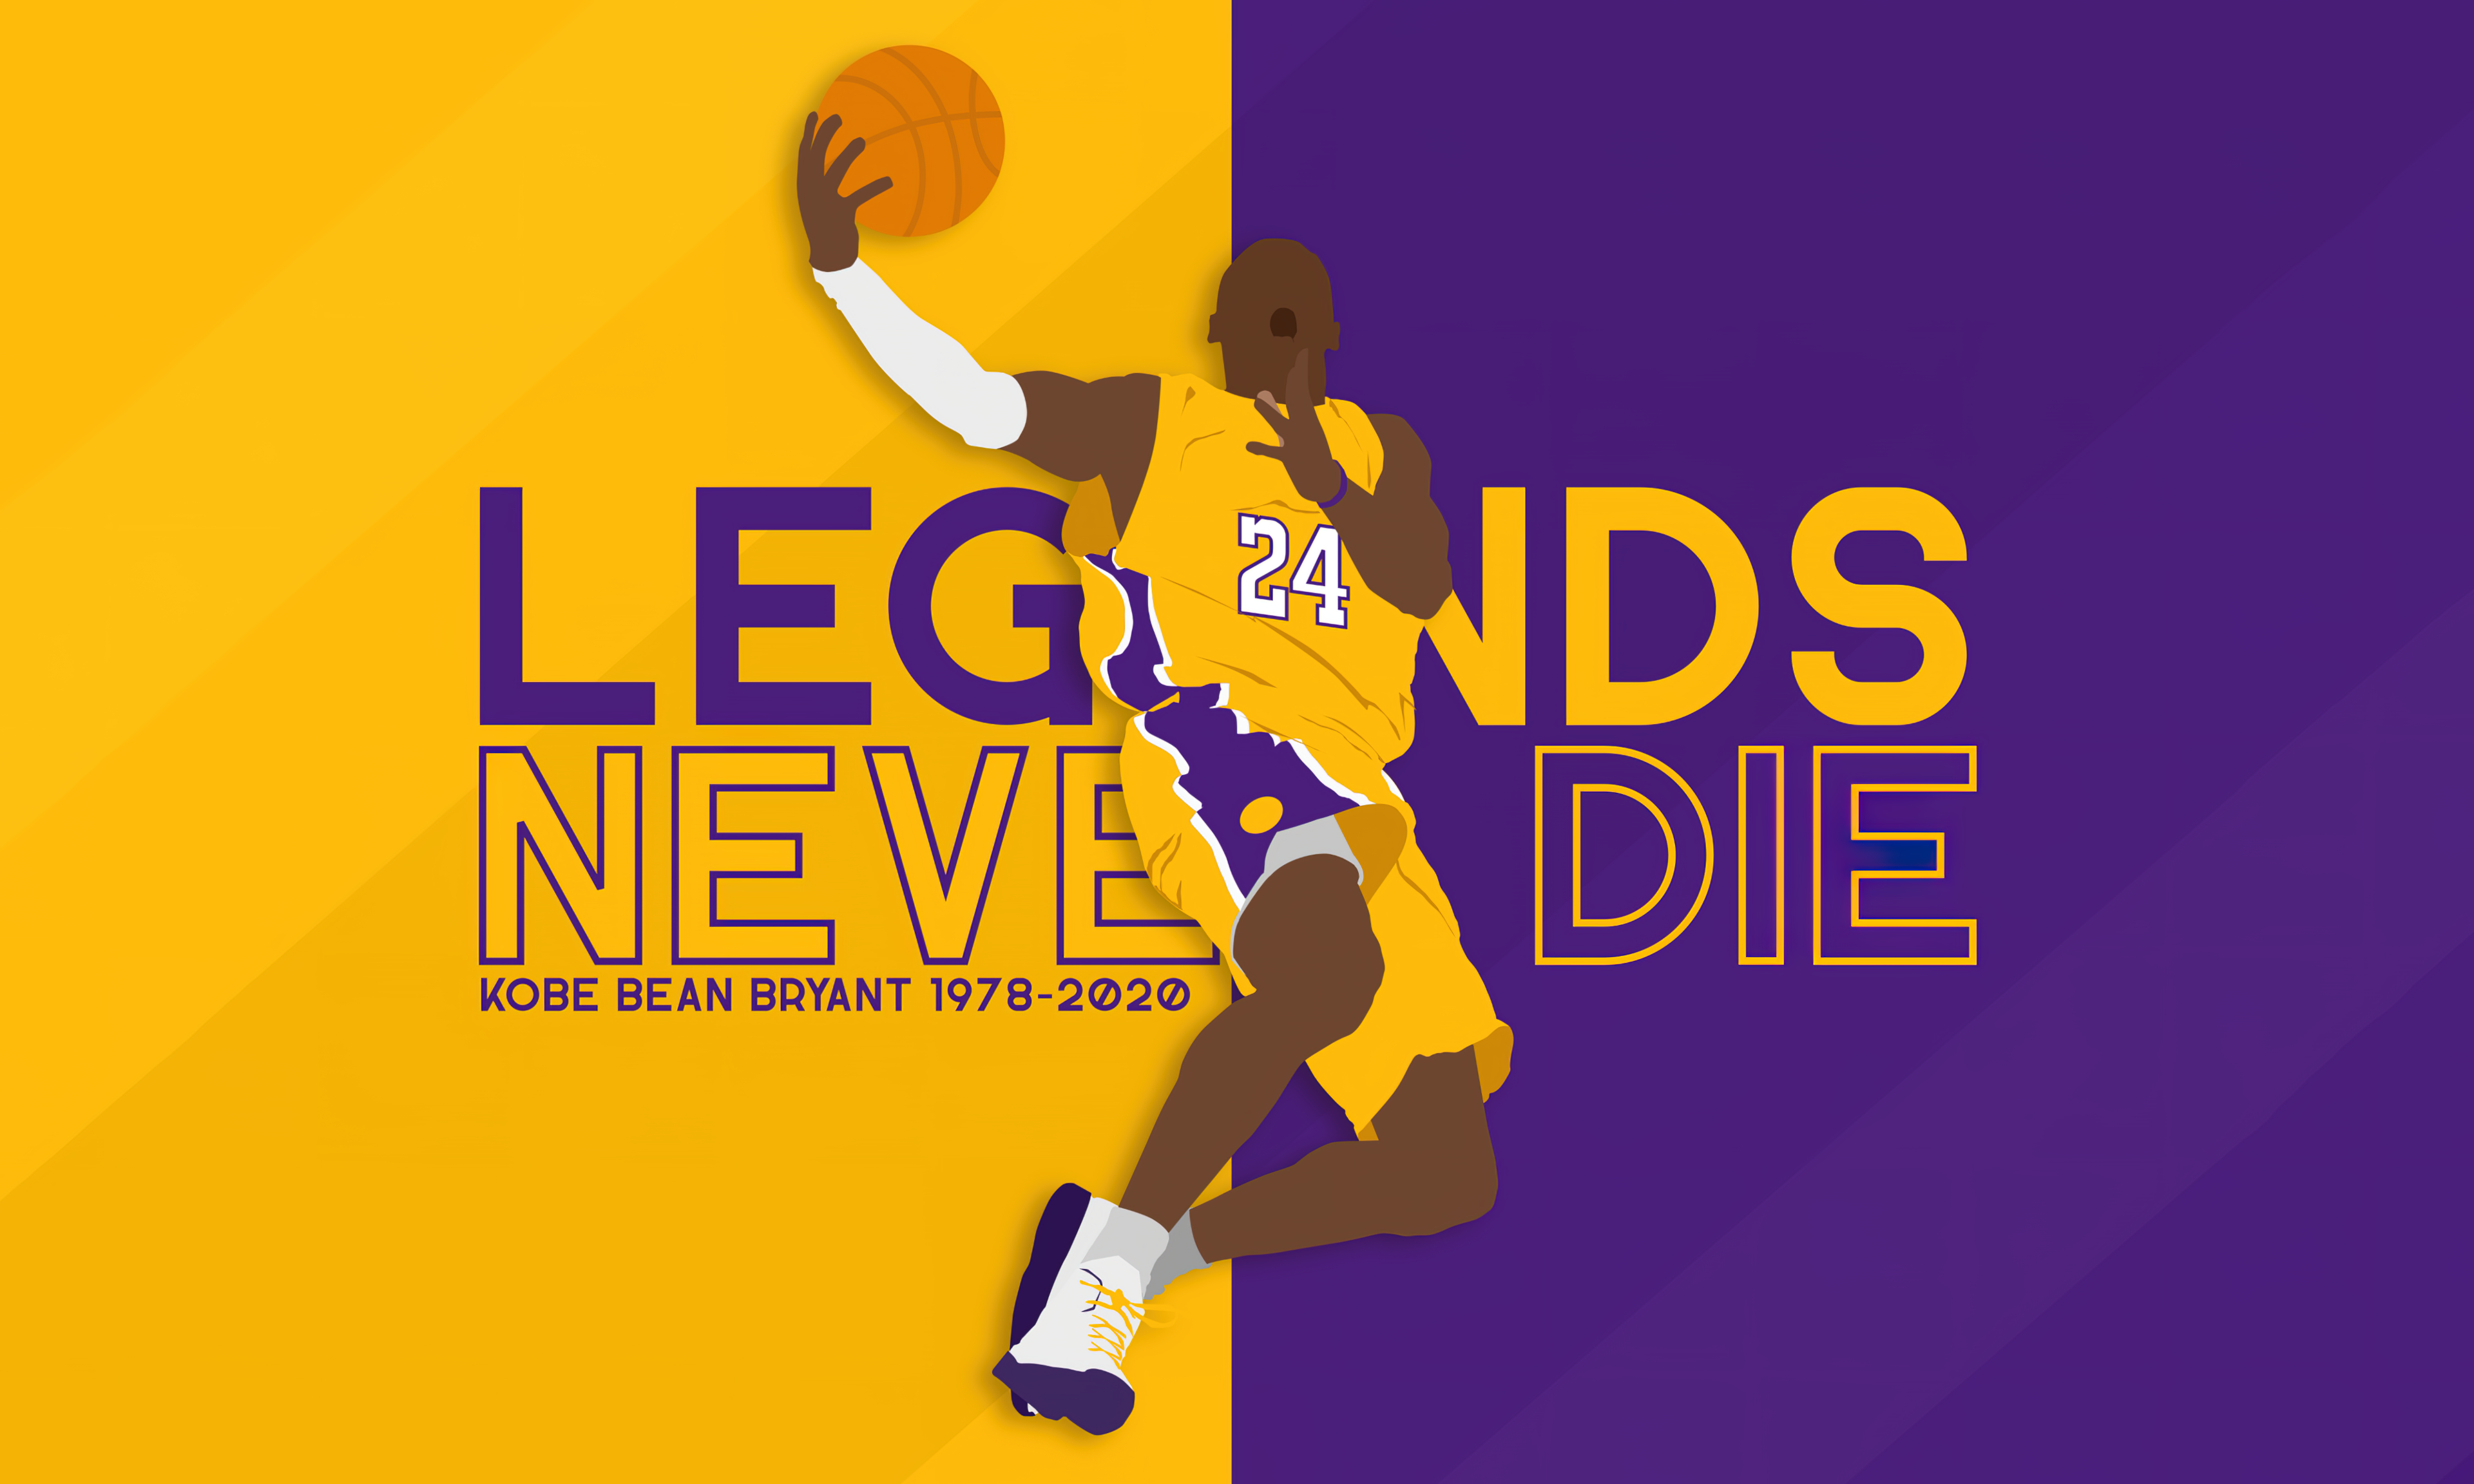 Kobe Bryant Wallpaper Discover more Background, basketball, cool, Desktop,  Iphone wallpapers.